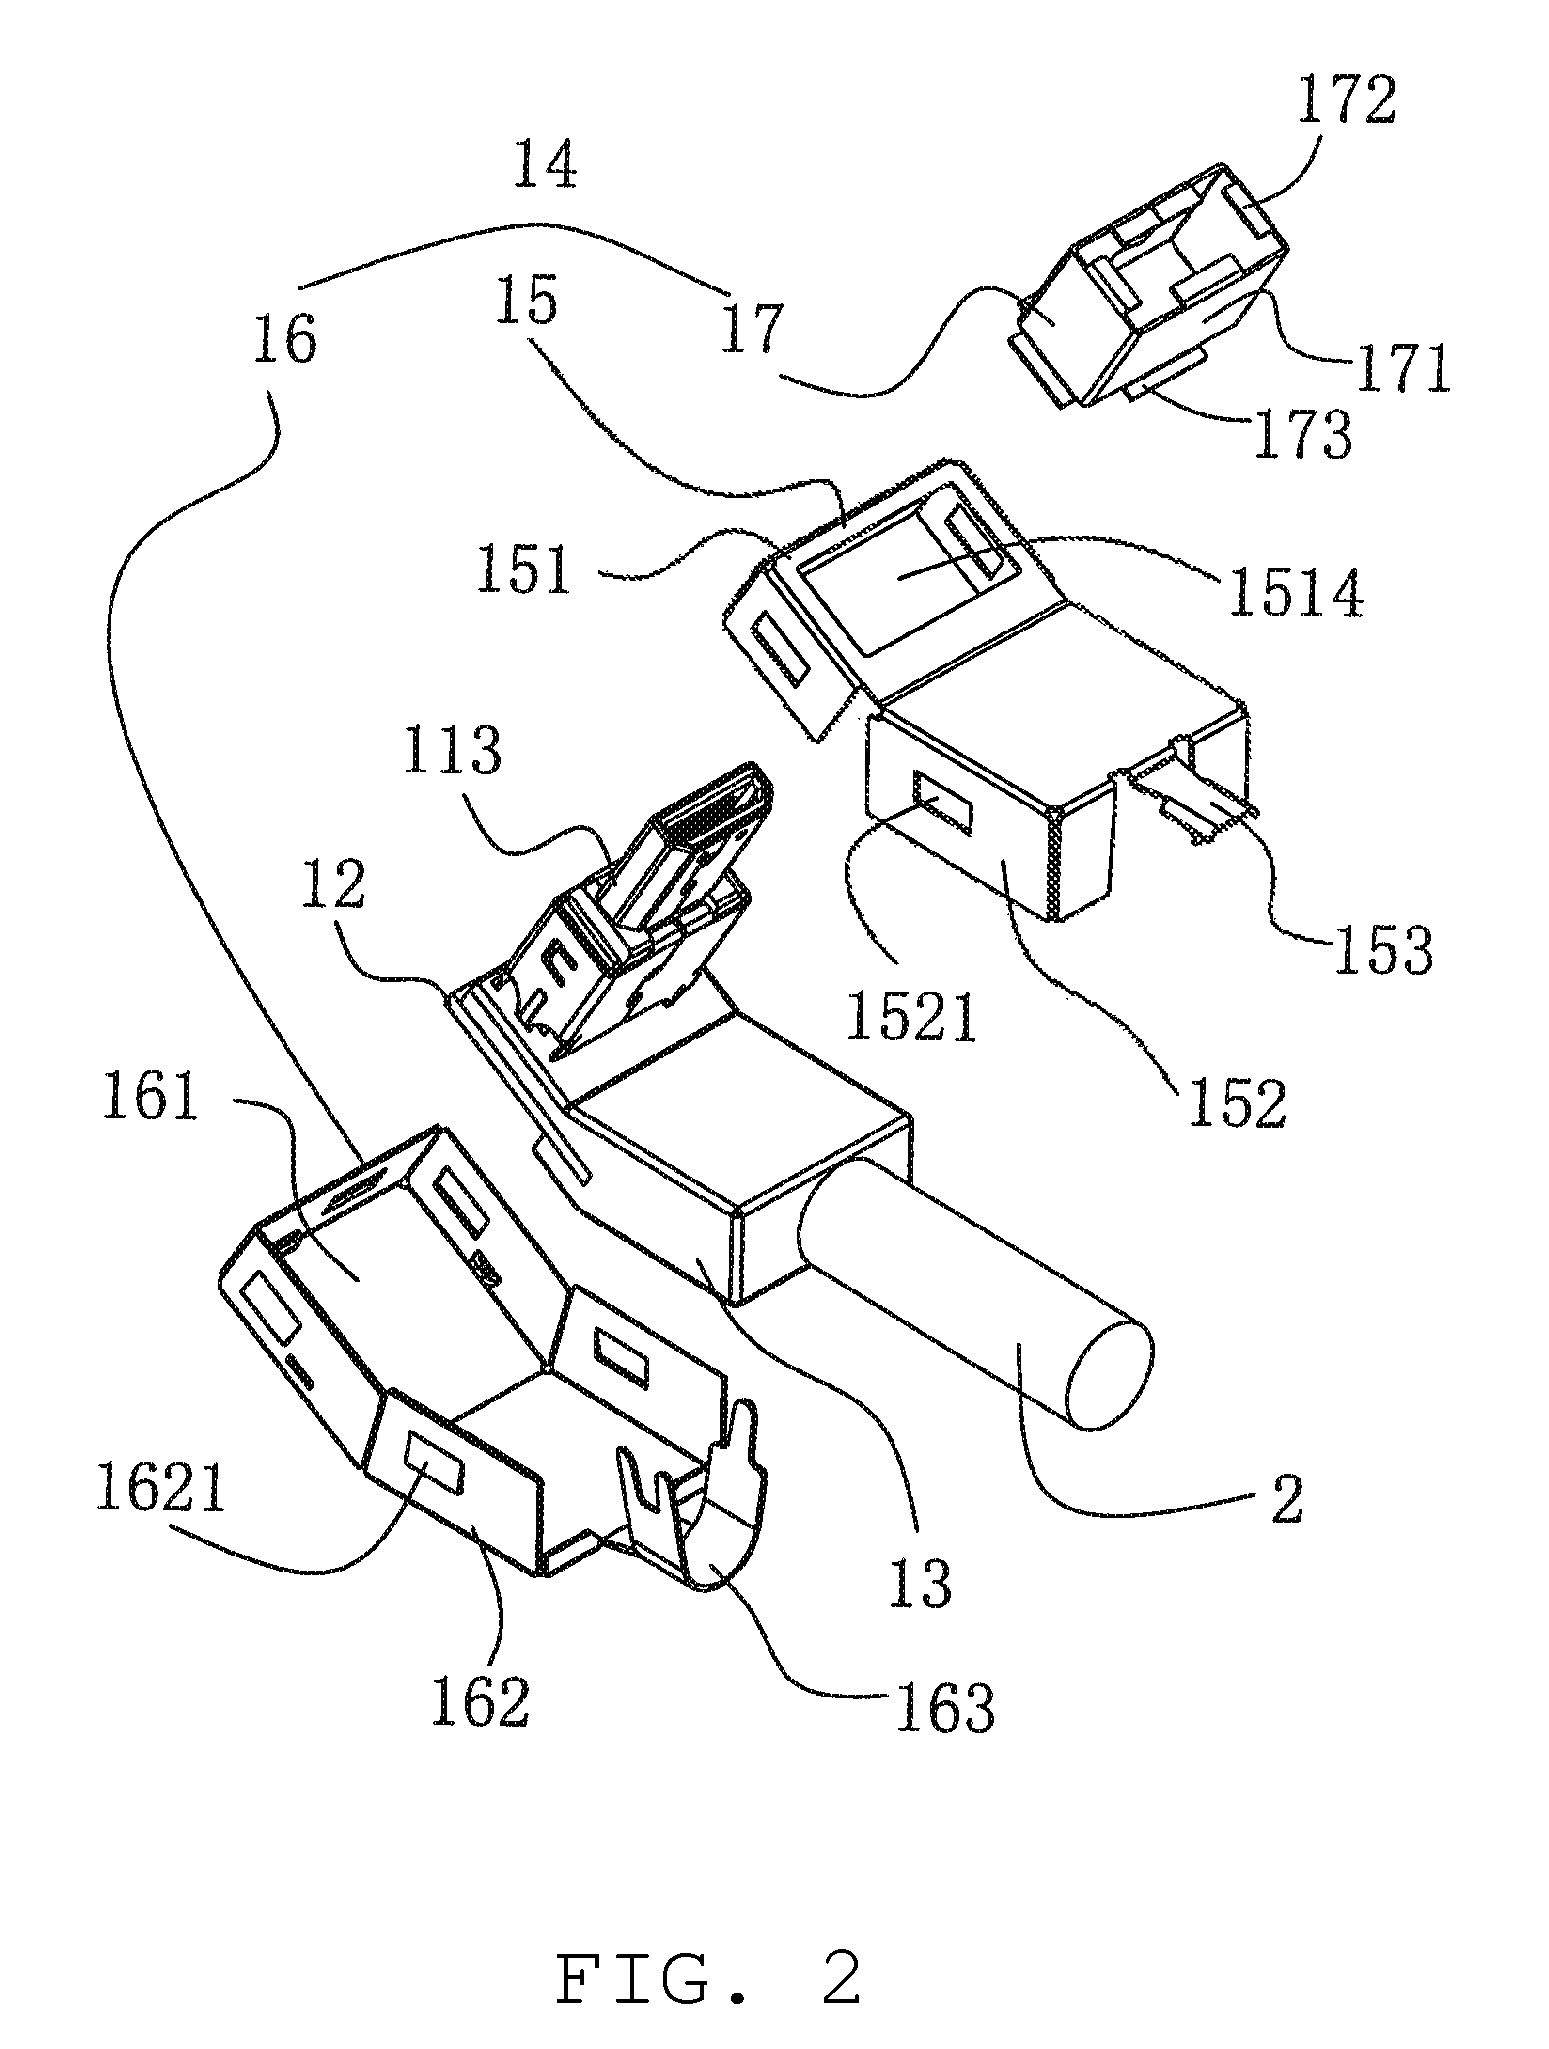 Cable connector having a circuit board partially encased by a coating and connected to a cable